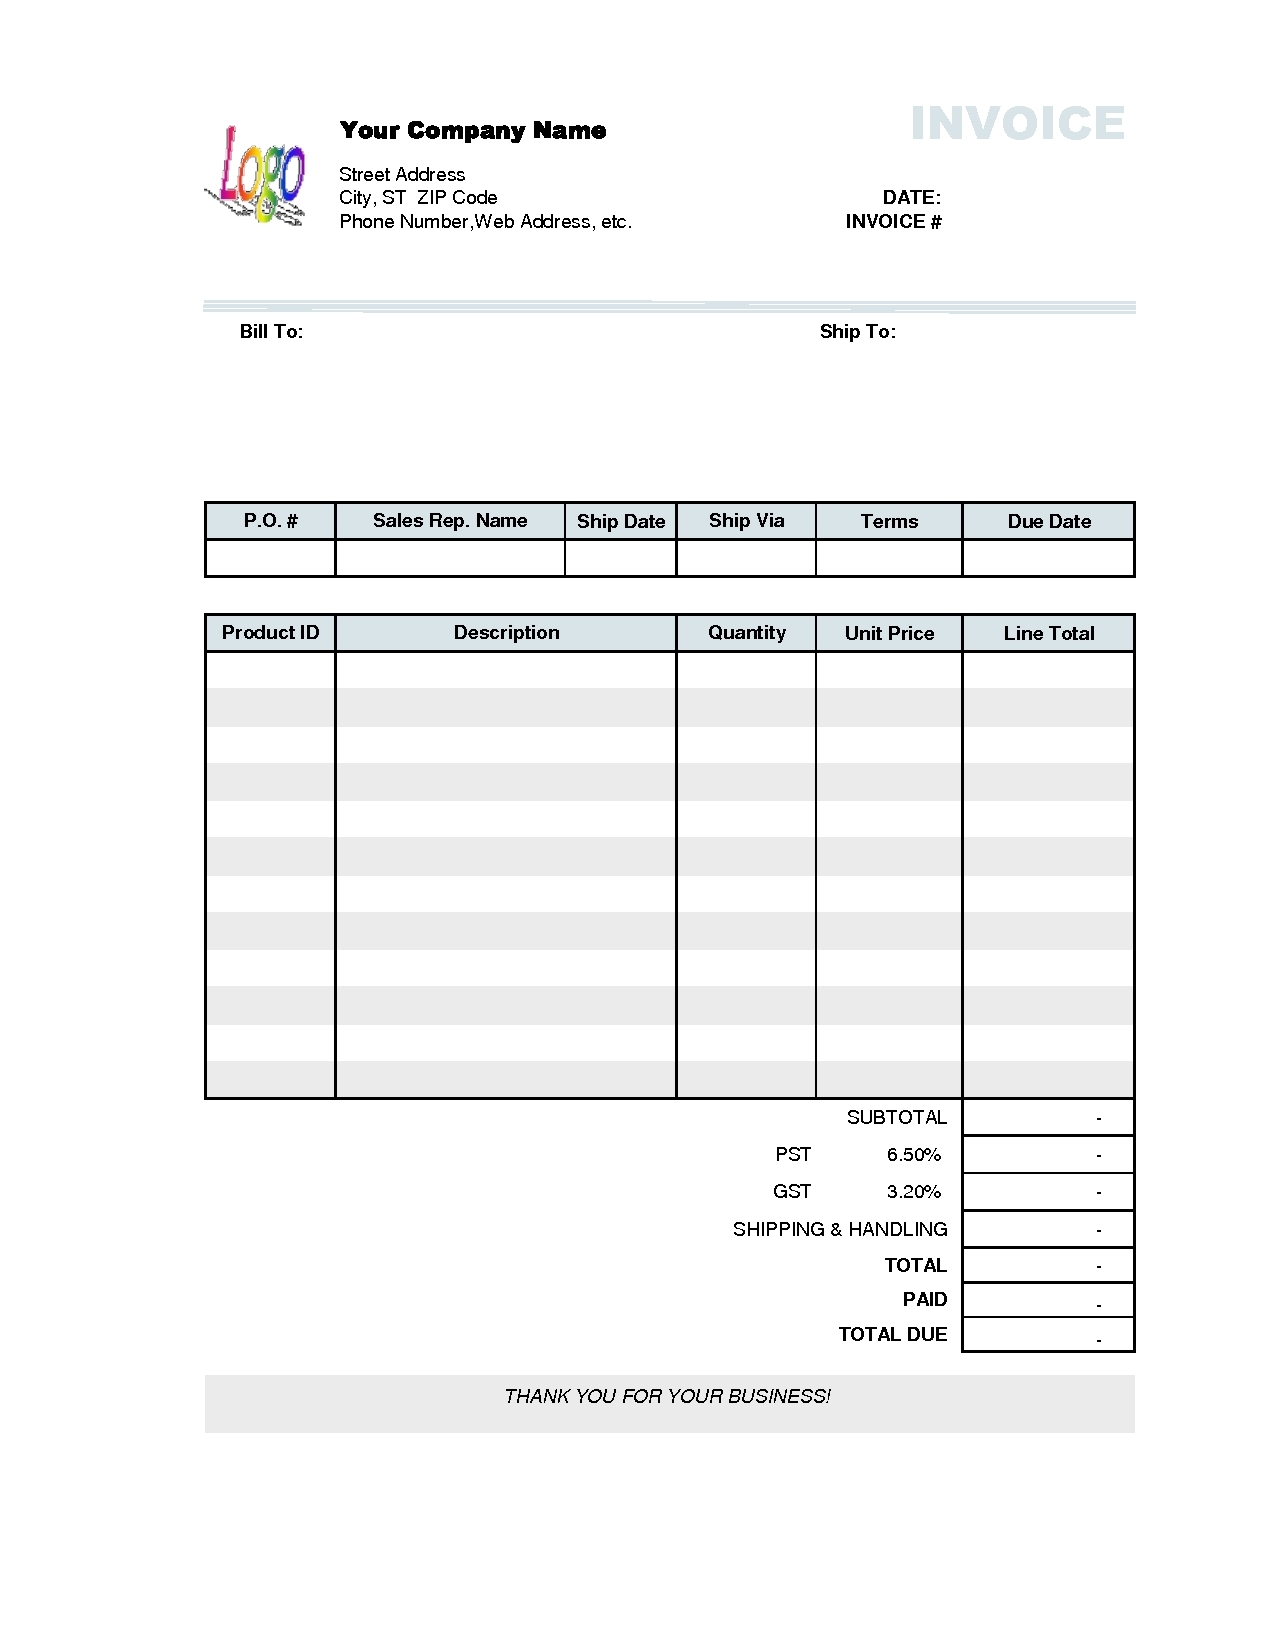 invoices-on-line-invoice-template-ideas